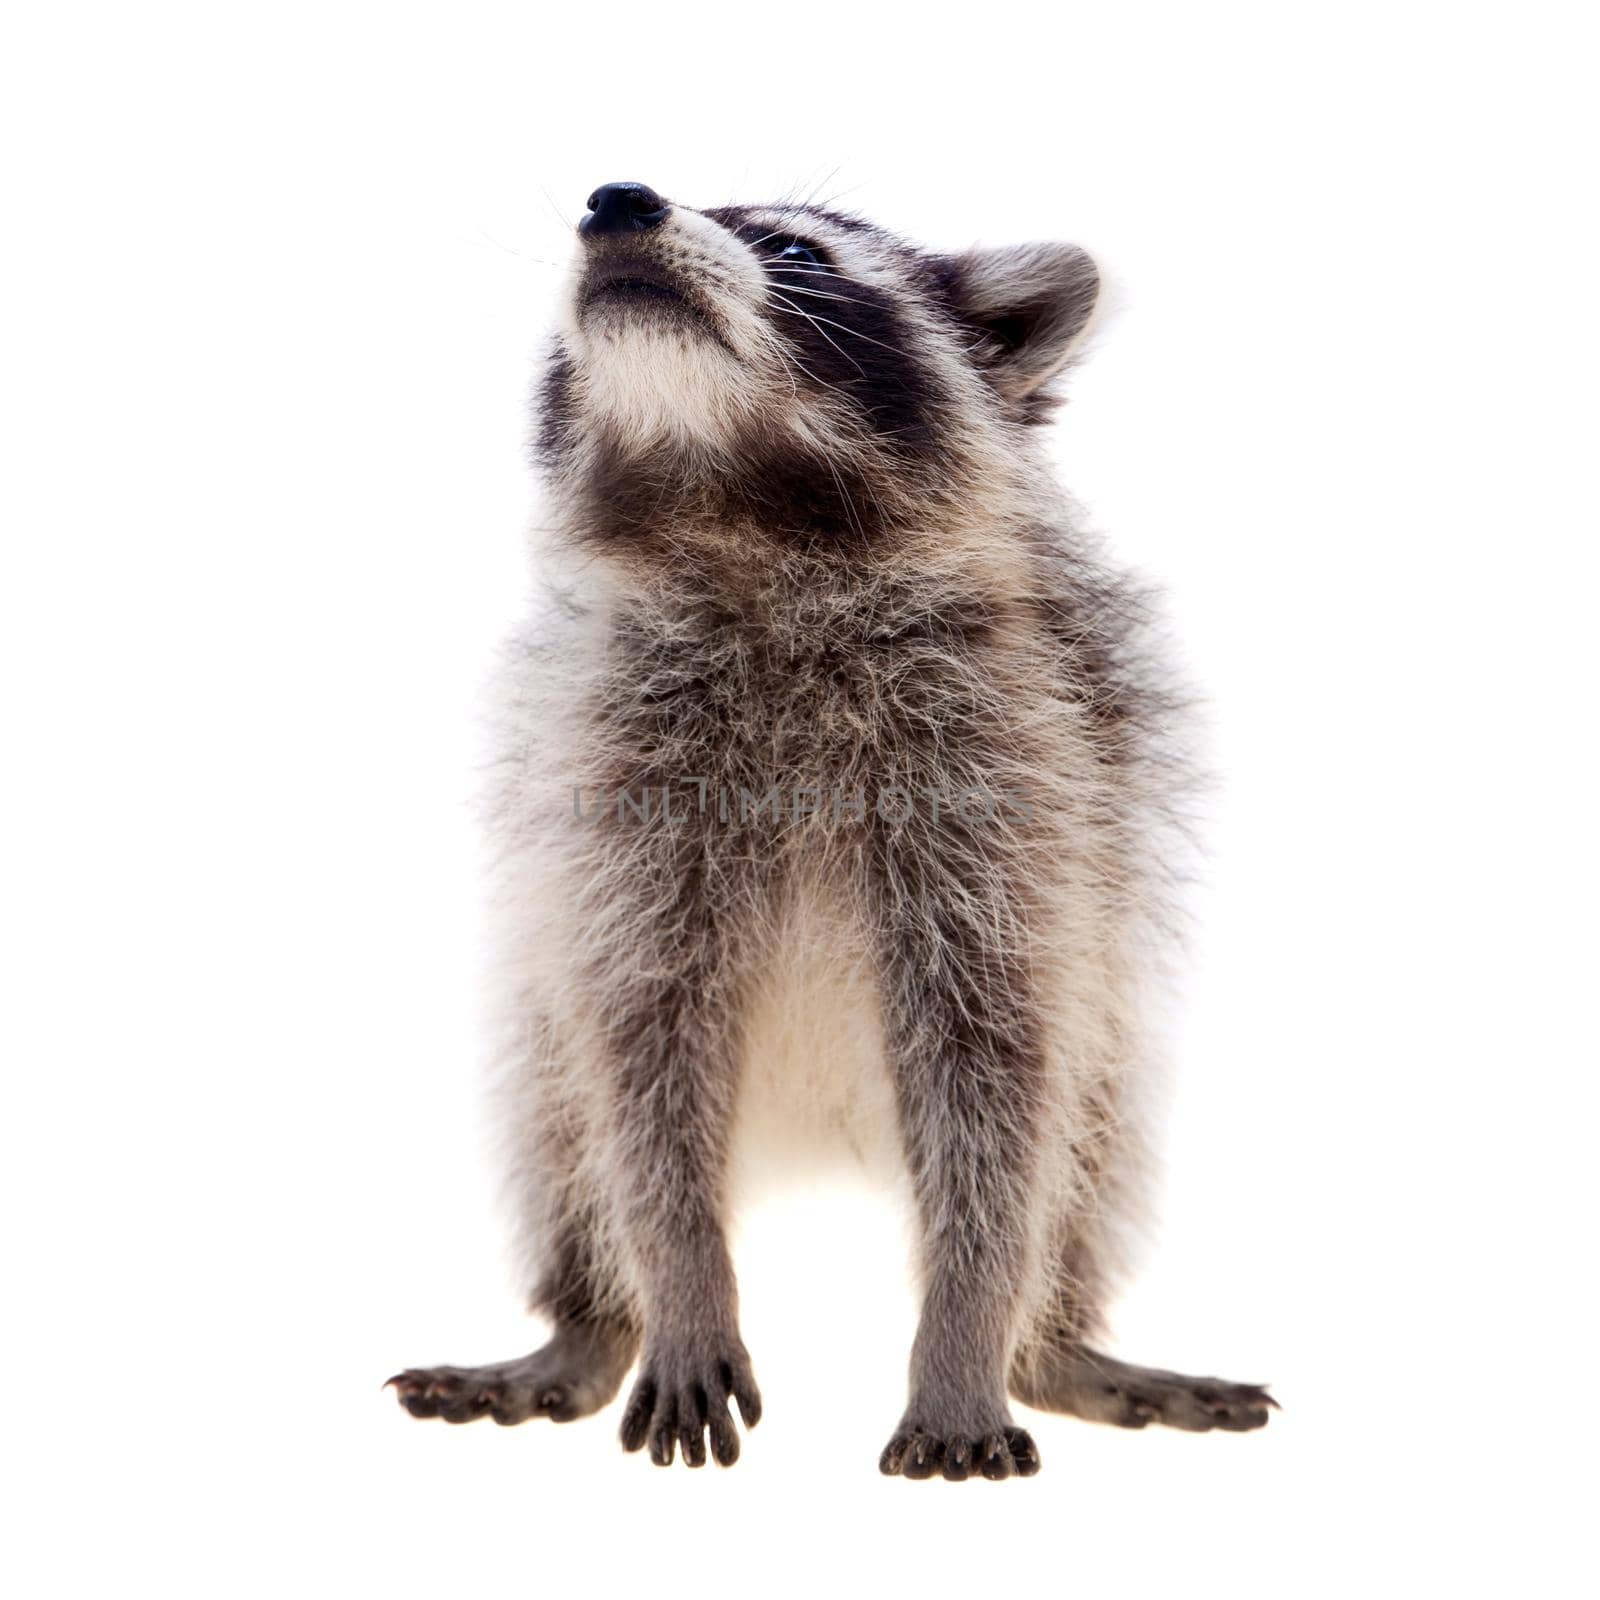 Baby raccoon - Procyon lotor in front of a white background